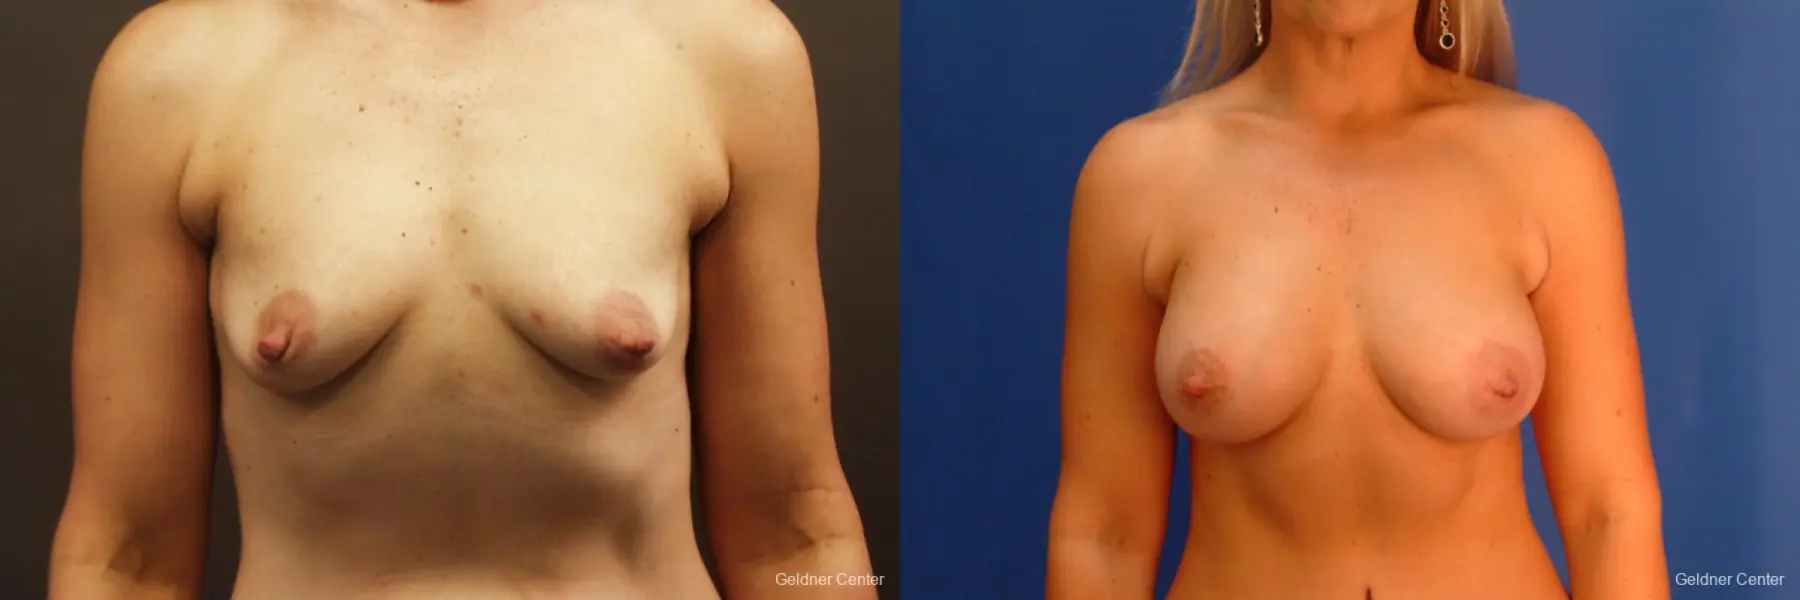 Breast Augmentation Hinsdale, Chicago 2632 - Before and After 1